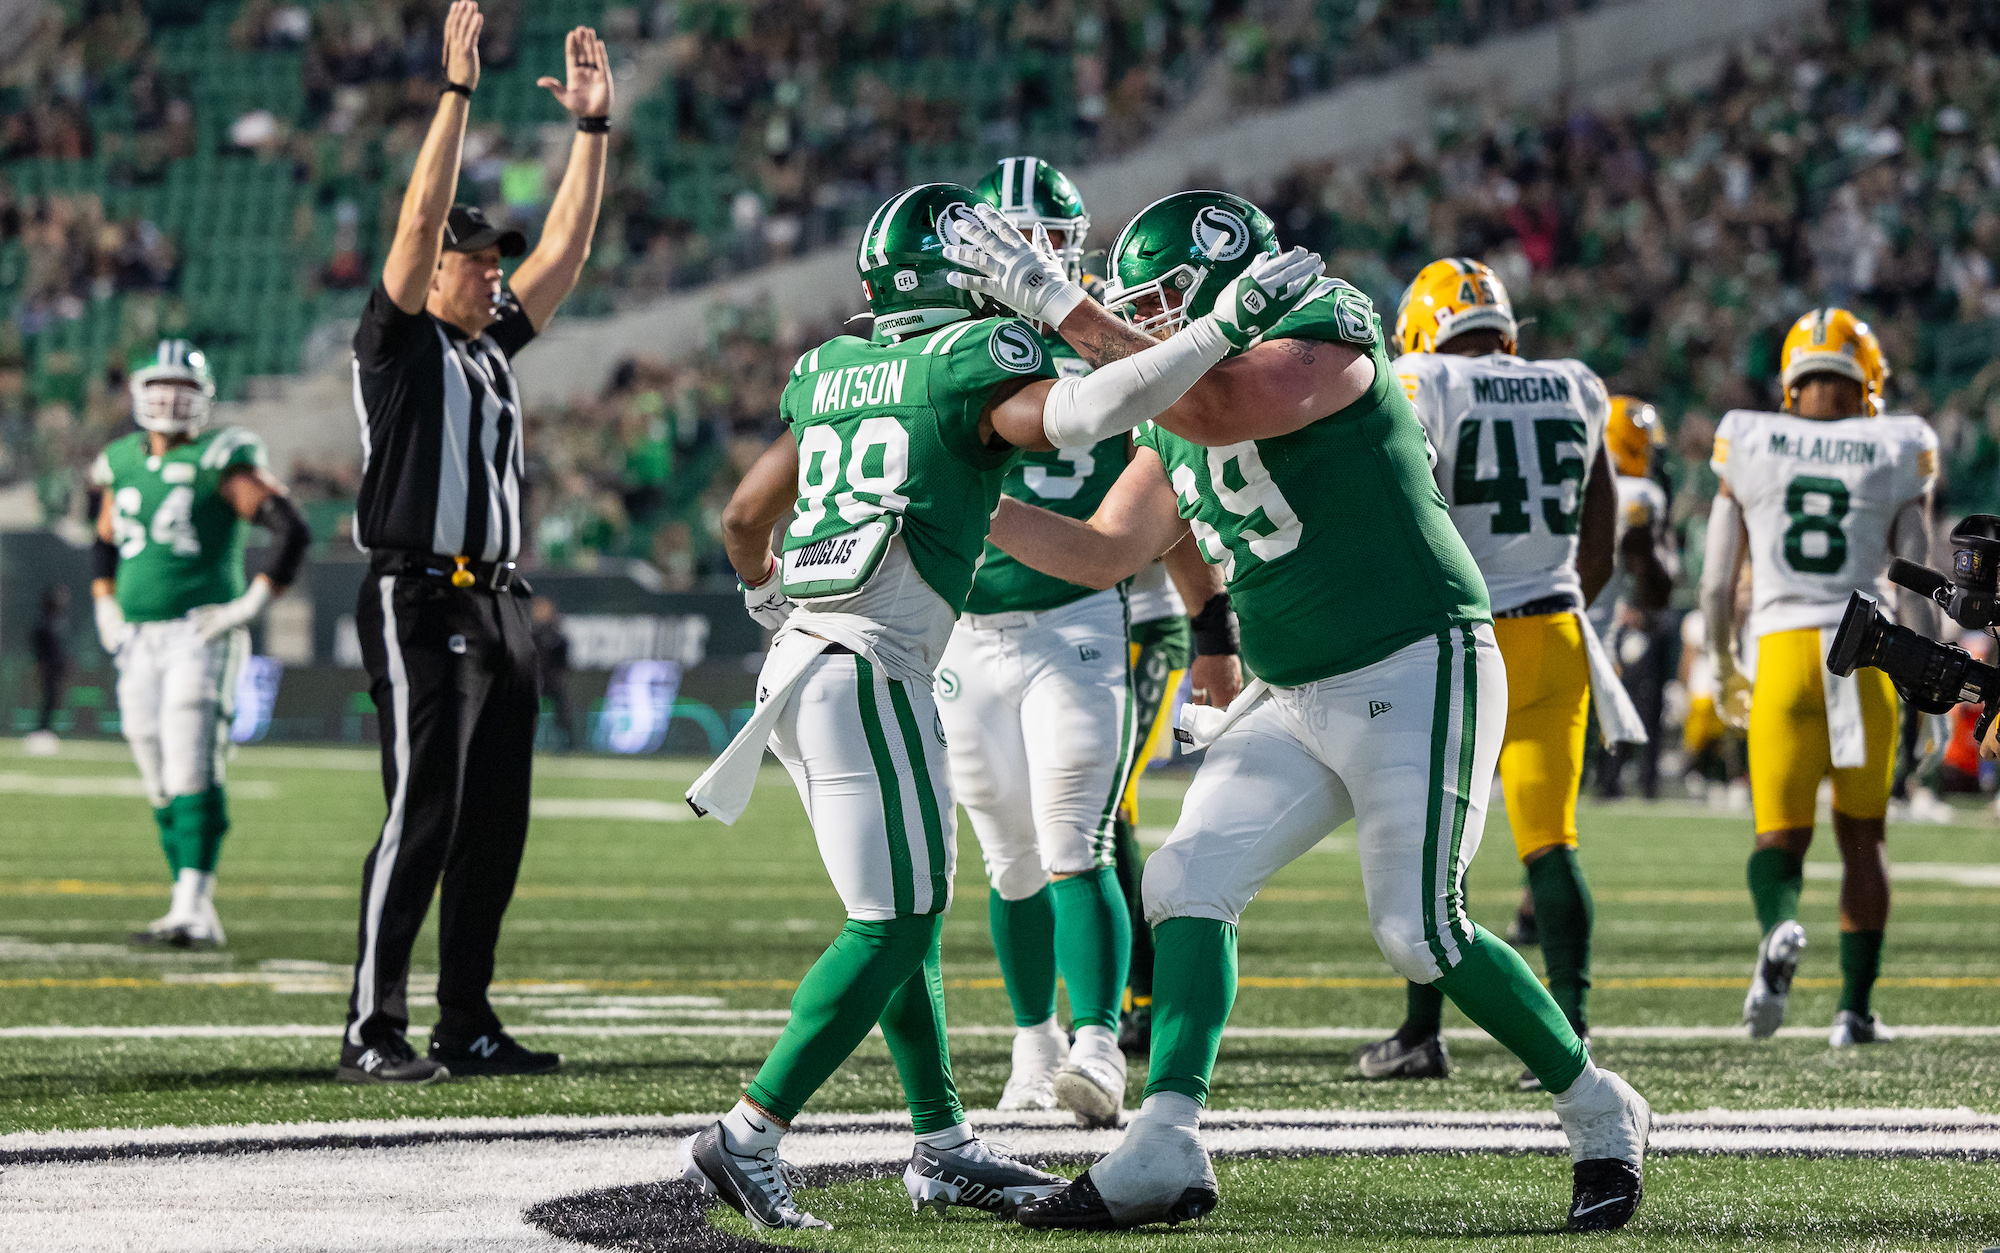 REGINA, CANADA - JULY 6: Kendall Watson #88 and Logan Bandy #69 of the Saskatchewan Roughriders celebrate after a two point conversion that tied the game between the Edmonton Elks and Saskatchewan Roughriders at Mosaic Stadium on July 6, 2023 in Regina, Canada. (Photo by Brent Just/Getty Images)